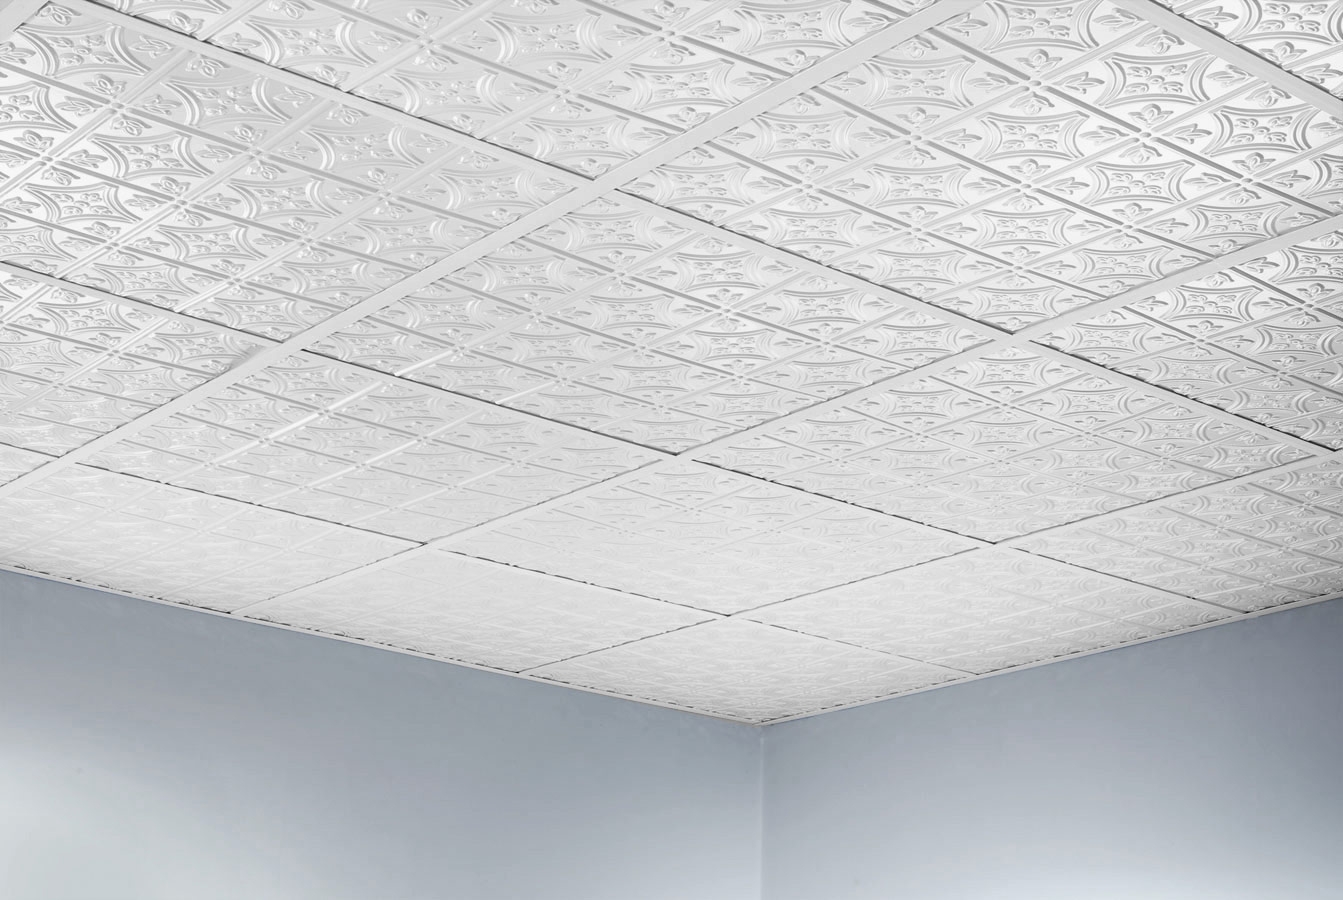 Armstrong Washable Acoustical Ceiling Tiles Armstrong Washable Acoustical Ceiling Tiles armstrong commercial kitchen ceiling tiles all home design ideas 1343 X 900